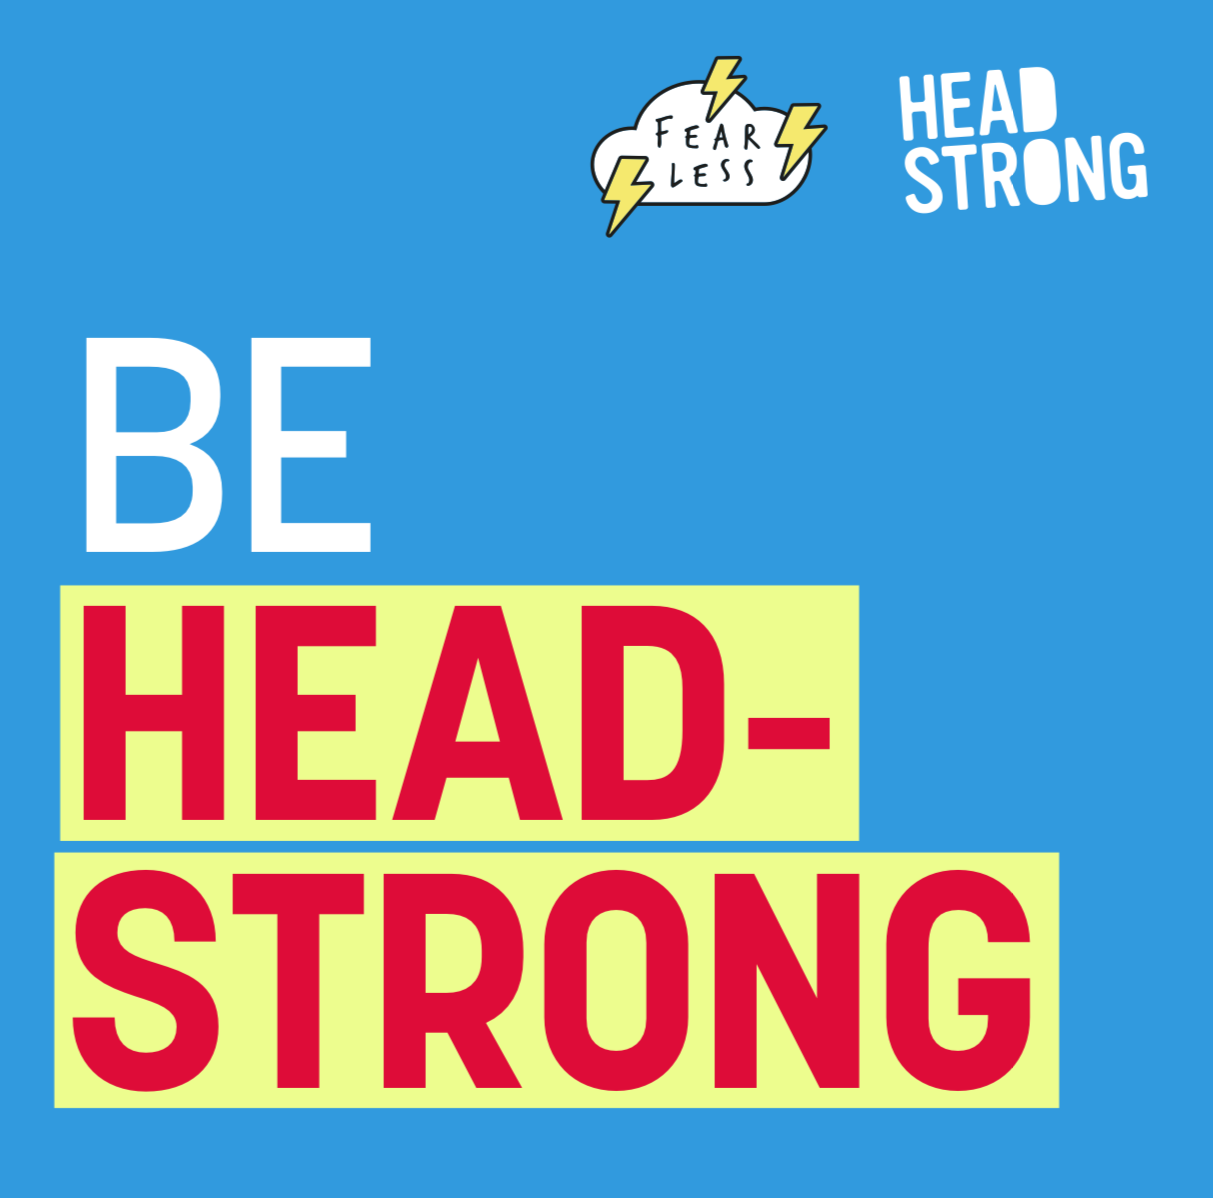 Headstrong ready-to-use session